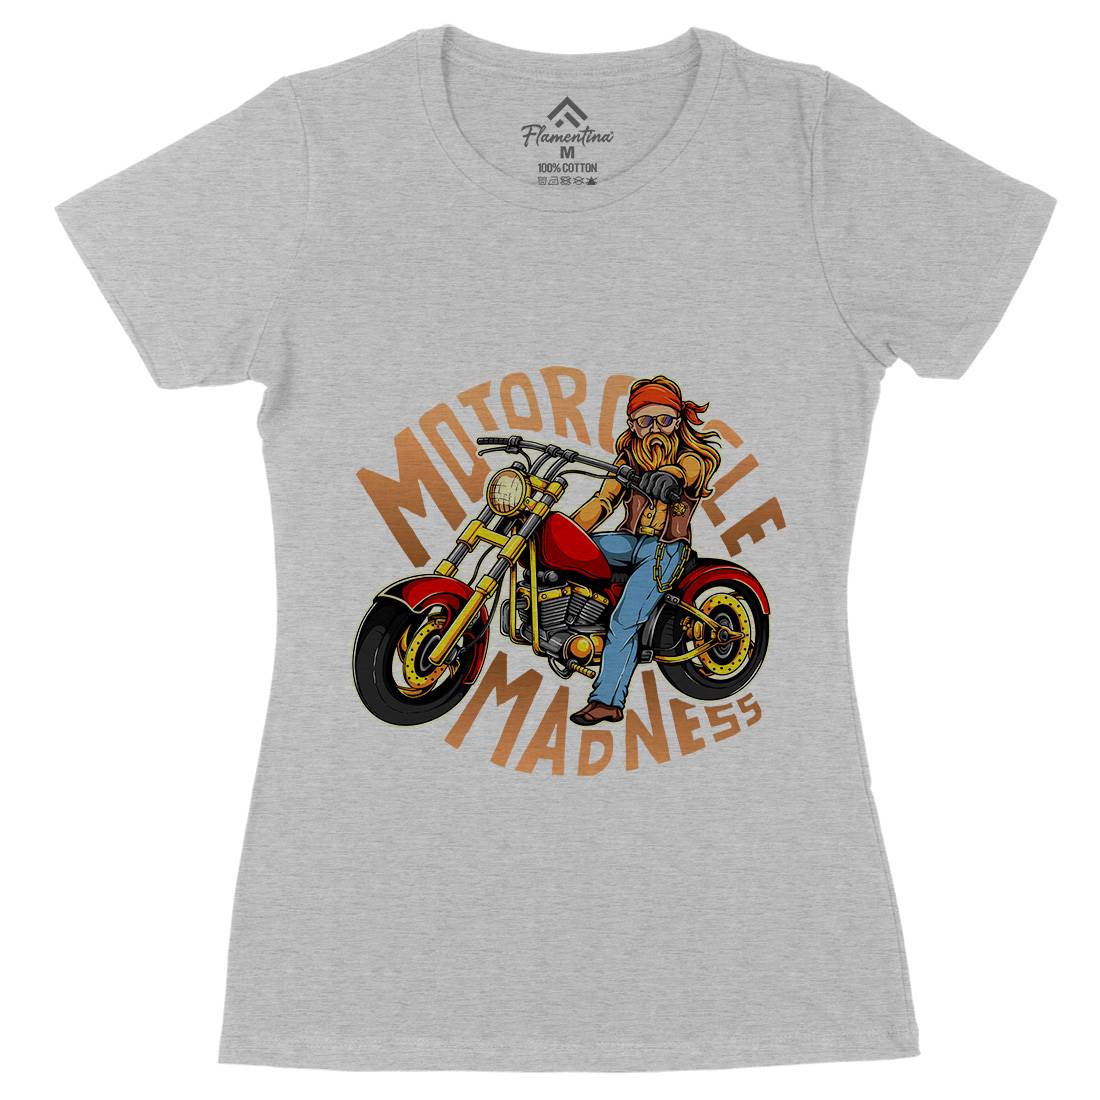 Madness Womens Organic Crew Neck T-Shirt Motorcycles A438